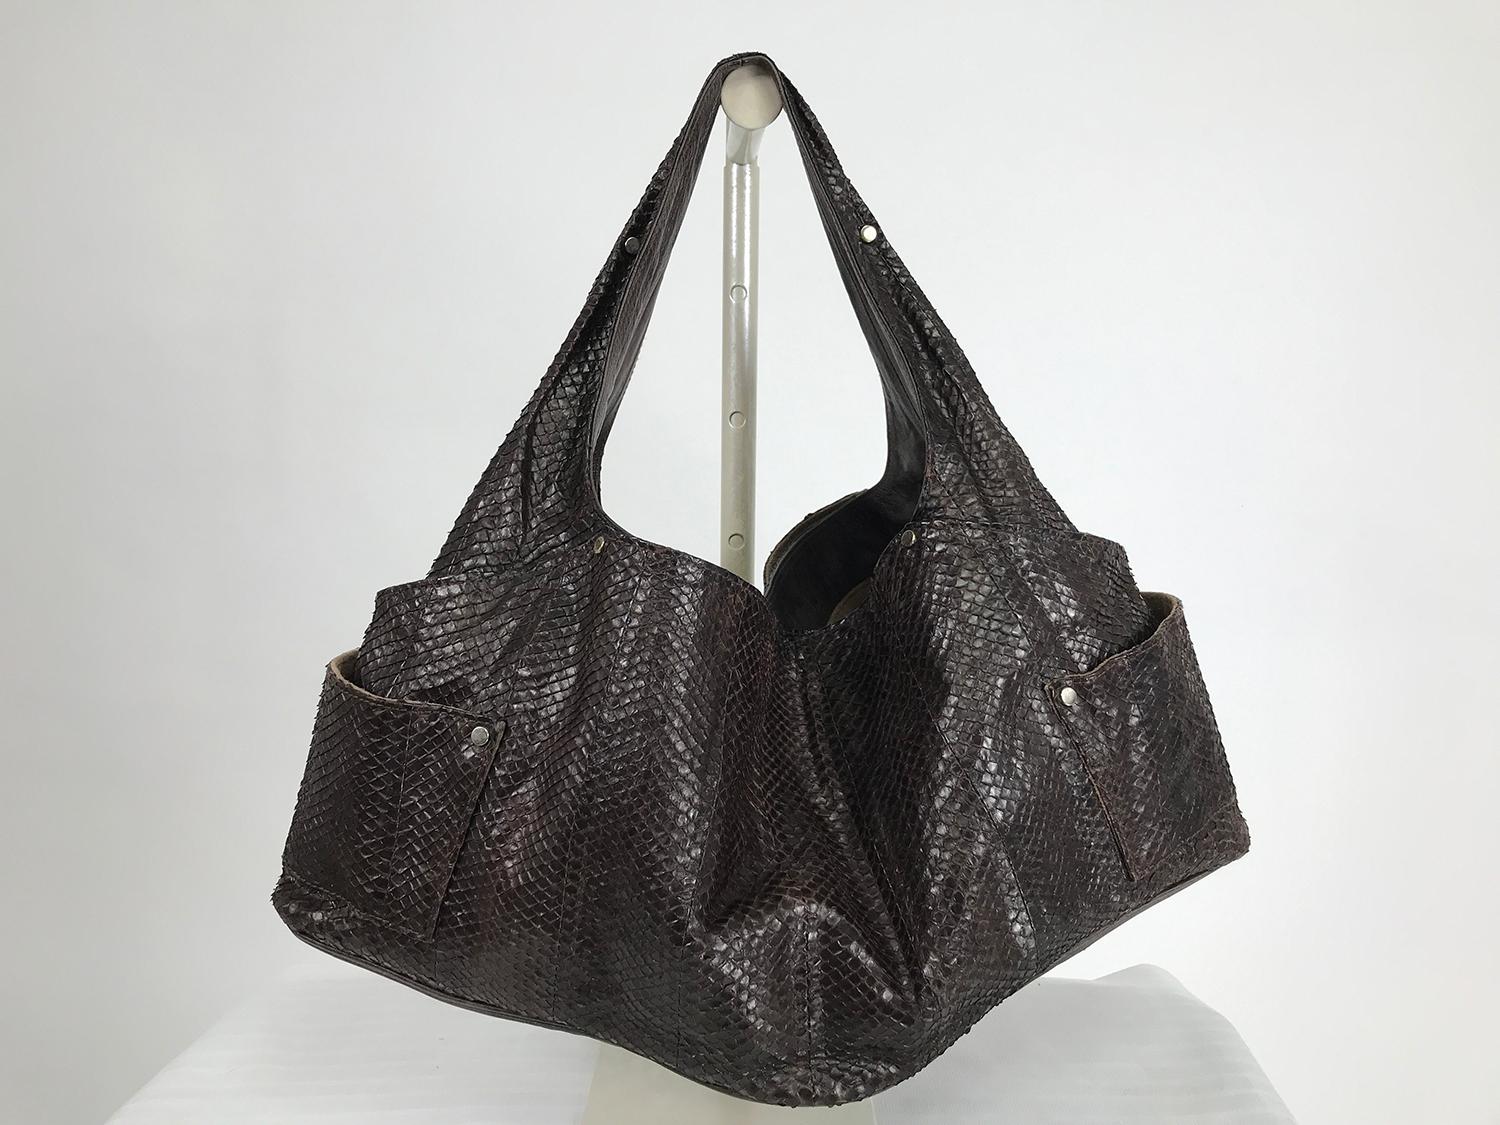 R & Y Augousti Paris large brown snakeskin shoulder bag with silver studs. Soft skin bag has a leather lined shoulder strap that is incorporated in the bags design. The bag is large with outside slip compartments on either long side, there are